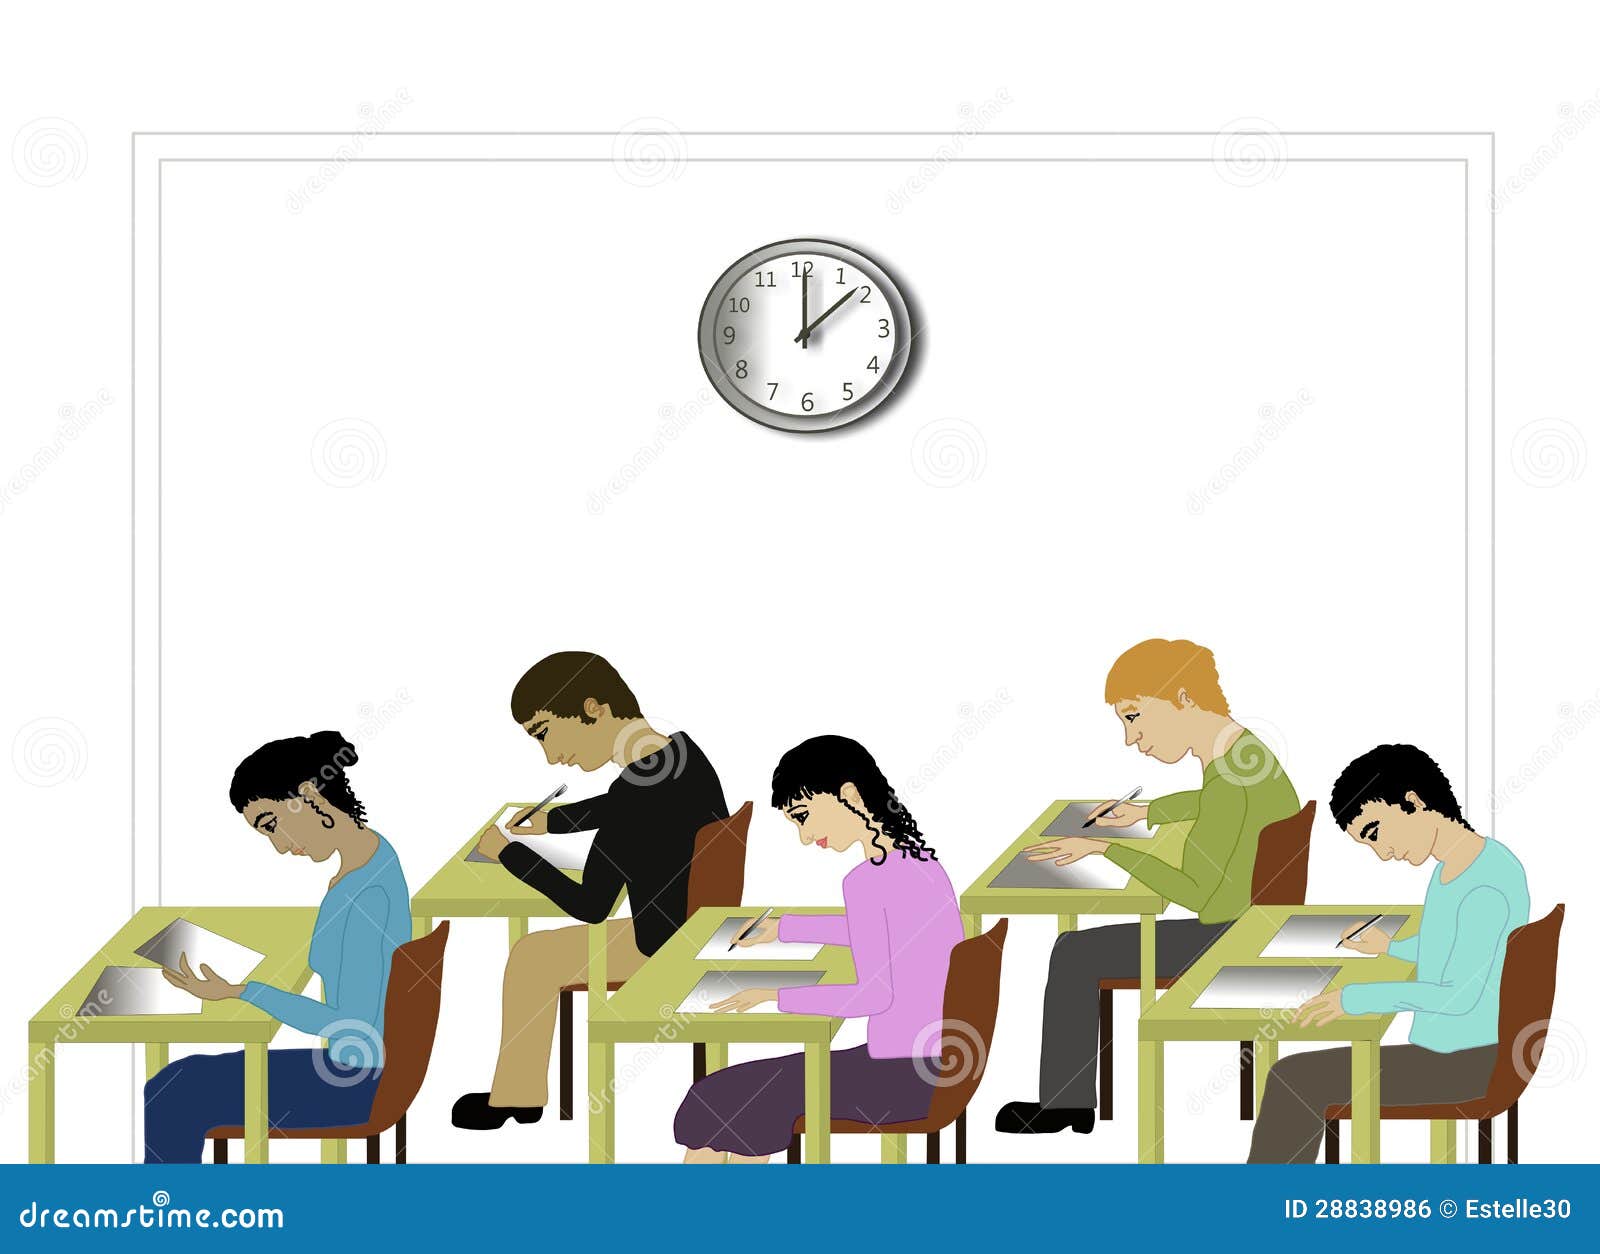 free clipart for school testing - photo #22